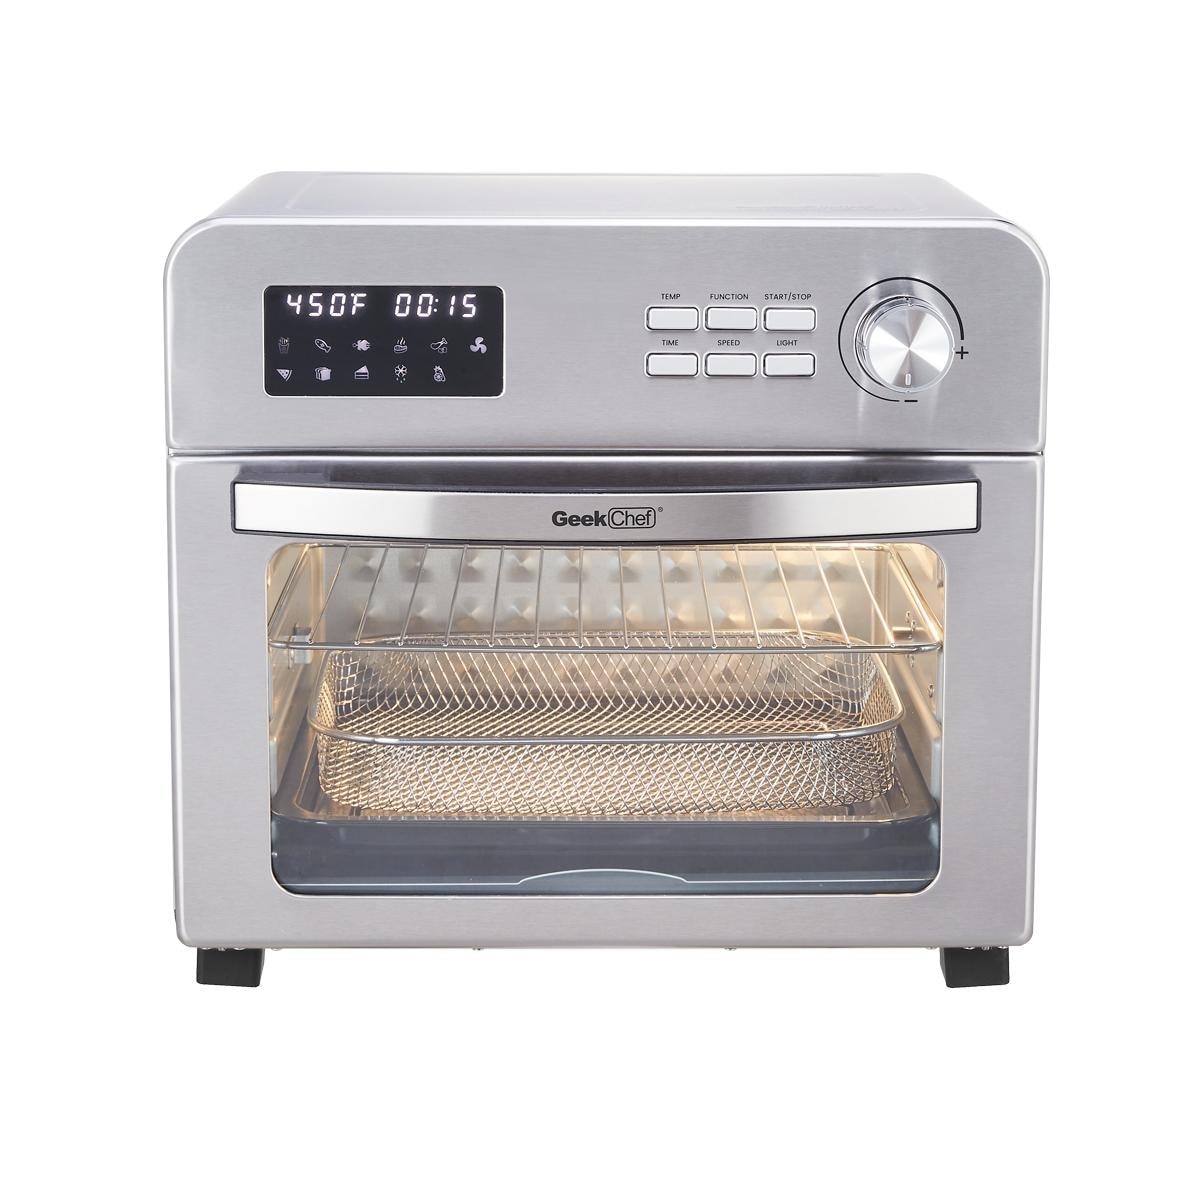 https://ak1.ostkcdn.com/images/products/is/images/direct/dcbb33135ca6bf017a5c9dd39ba879b6c801a706/Toaster-Oven%2C-6PCS-Convection-Oven-Countertop%2C-Digit-Time-Temp-Control.jpg